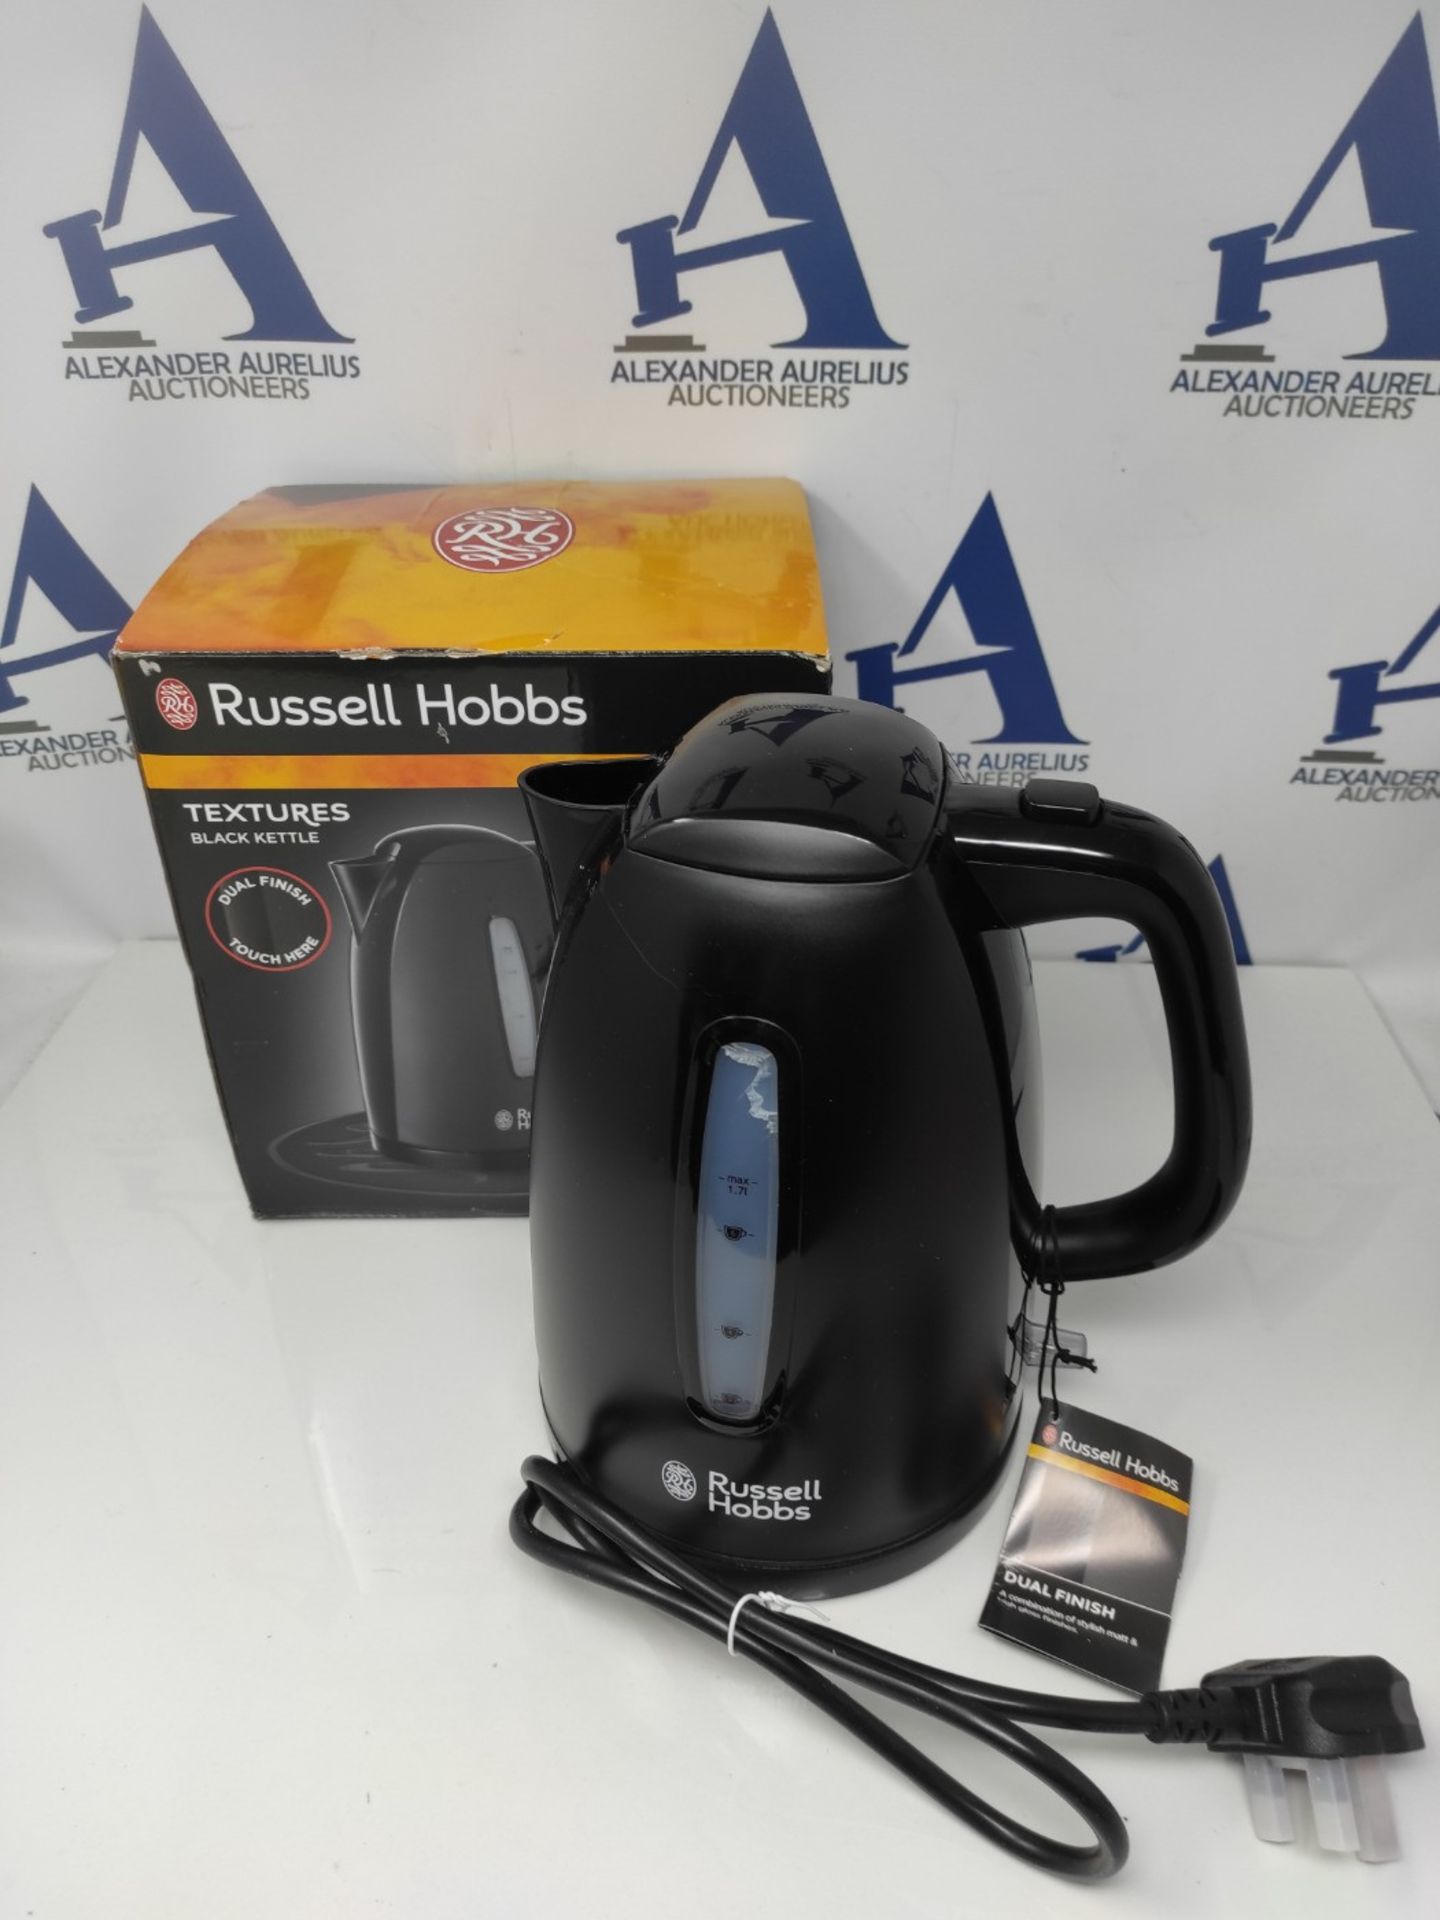 Russell Hobbs Textures Plastic Kettle 21271, 1.7 L, 3000 W - Black - Image 2 of 3